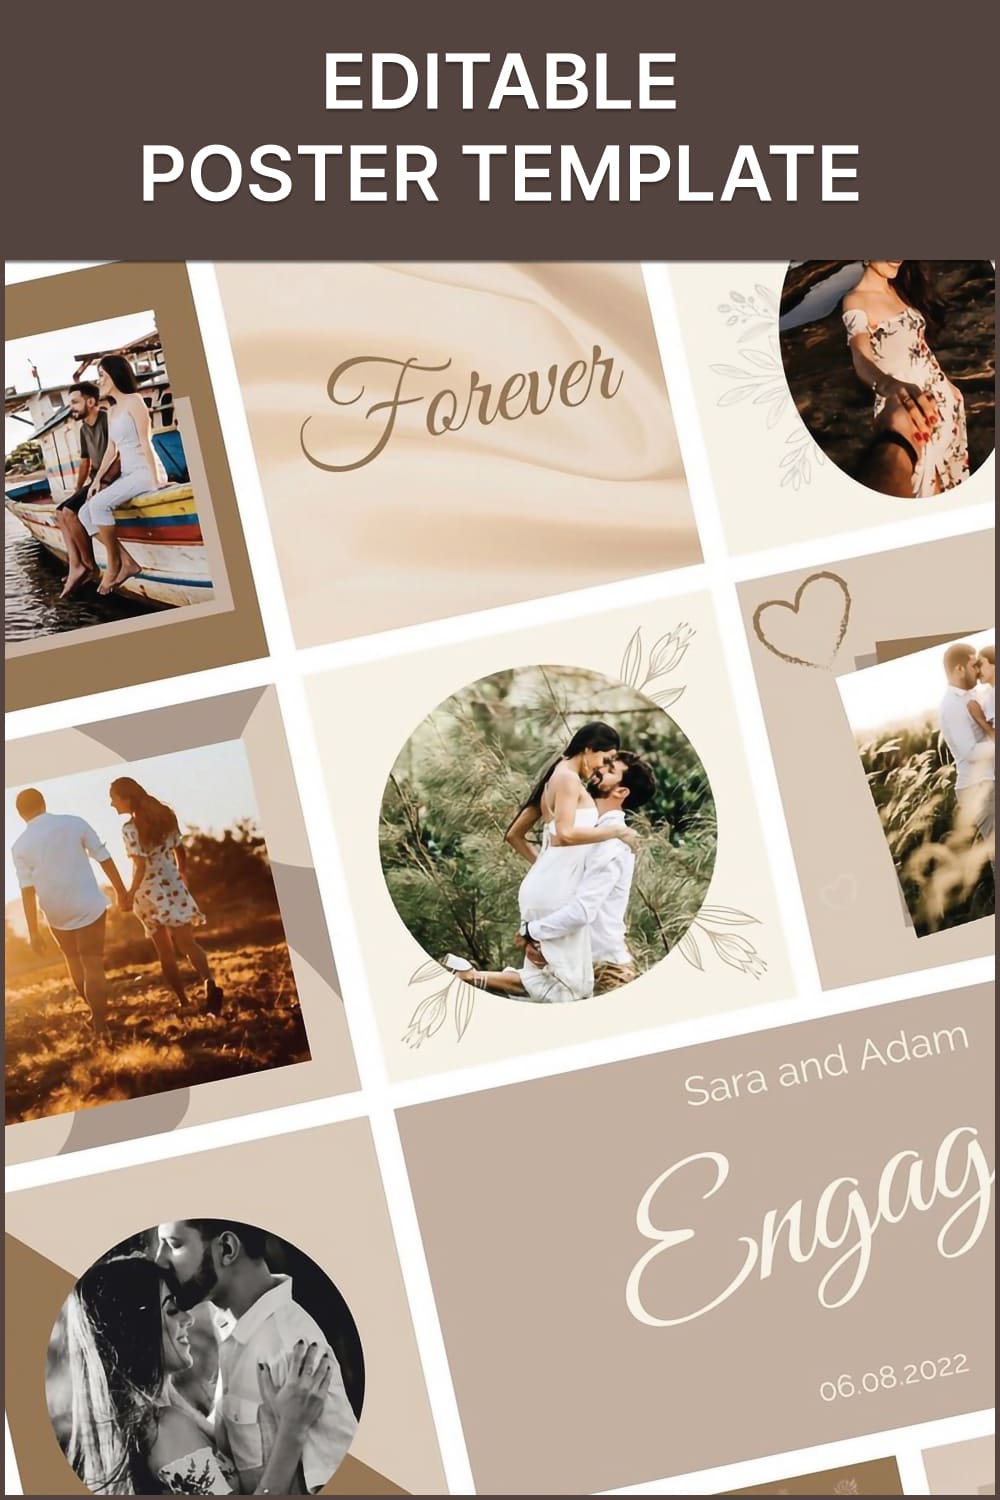 Editable Poster Template, Digital Download, Instant Access, Personalize & Customize With Own Text And Photos In Powerpoint Or Google Slides - Pinterest.